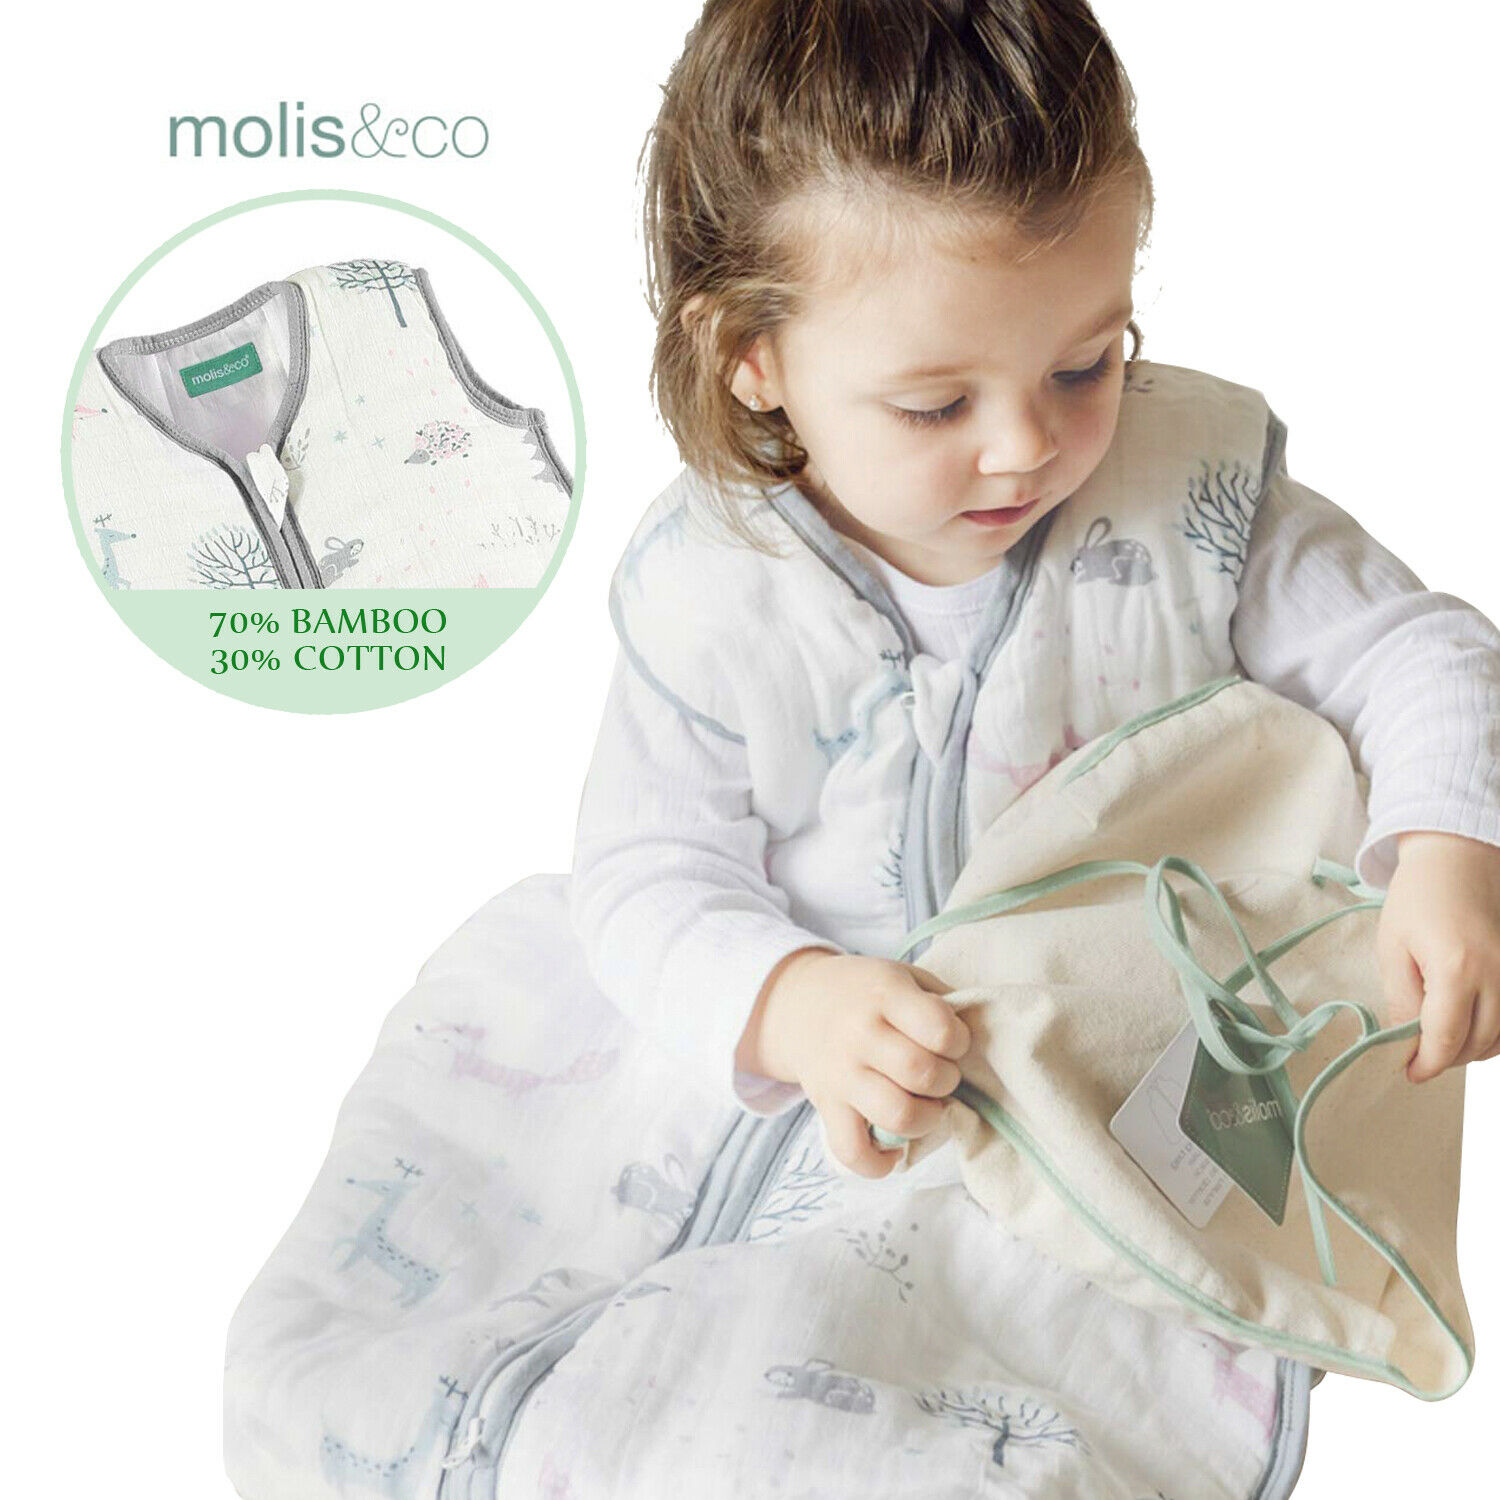 Molis & co Premium Muslin Baby Sleeping Bag and Sack, Super Soft and Light  Unisex Wearable Blanket, Blue and Beige, 18-36 Months, 0.5 TOG 